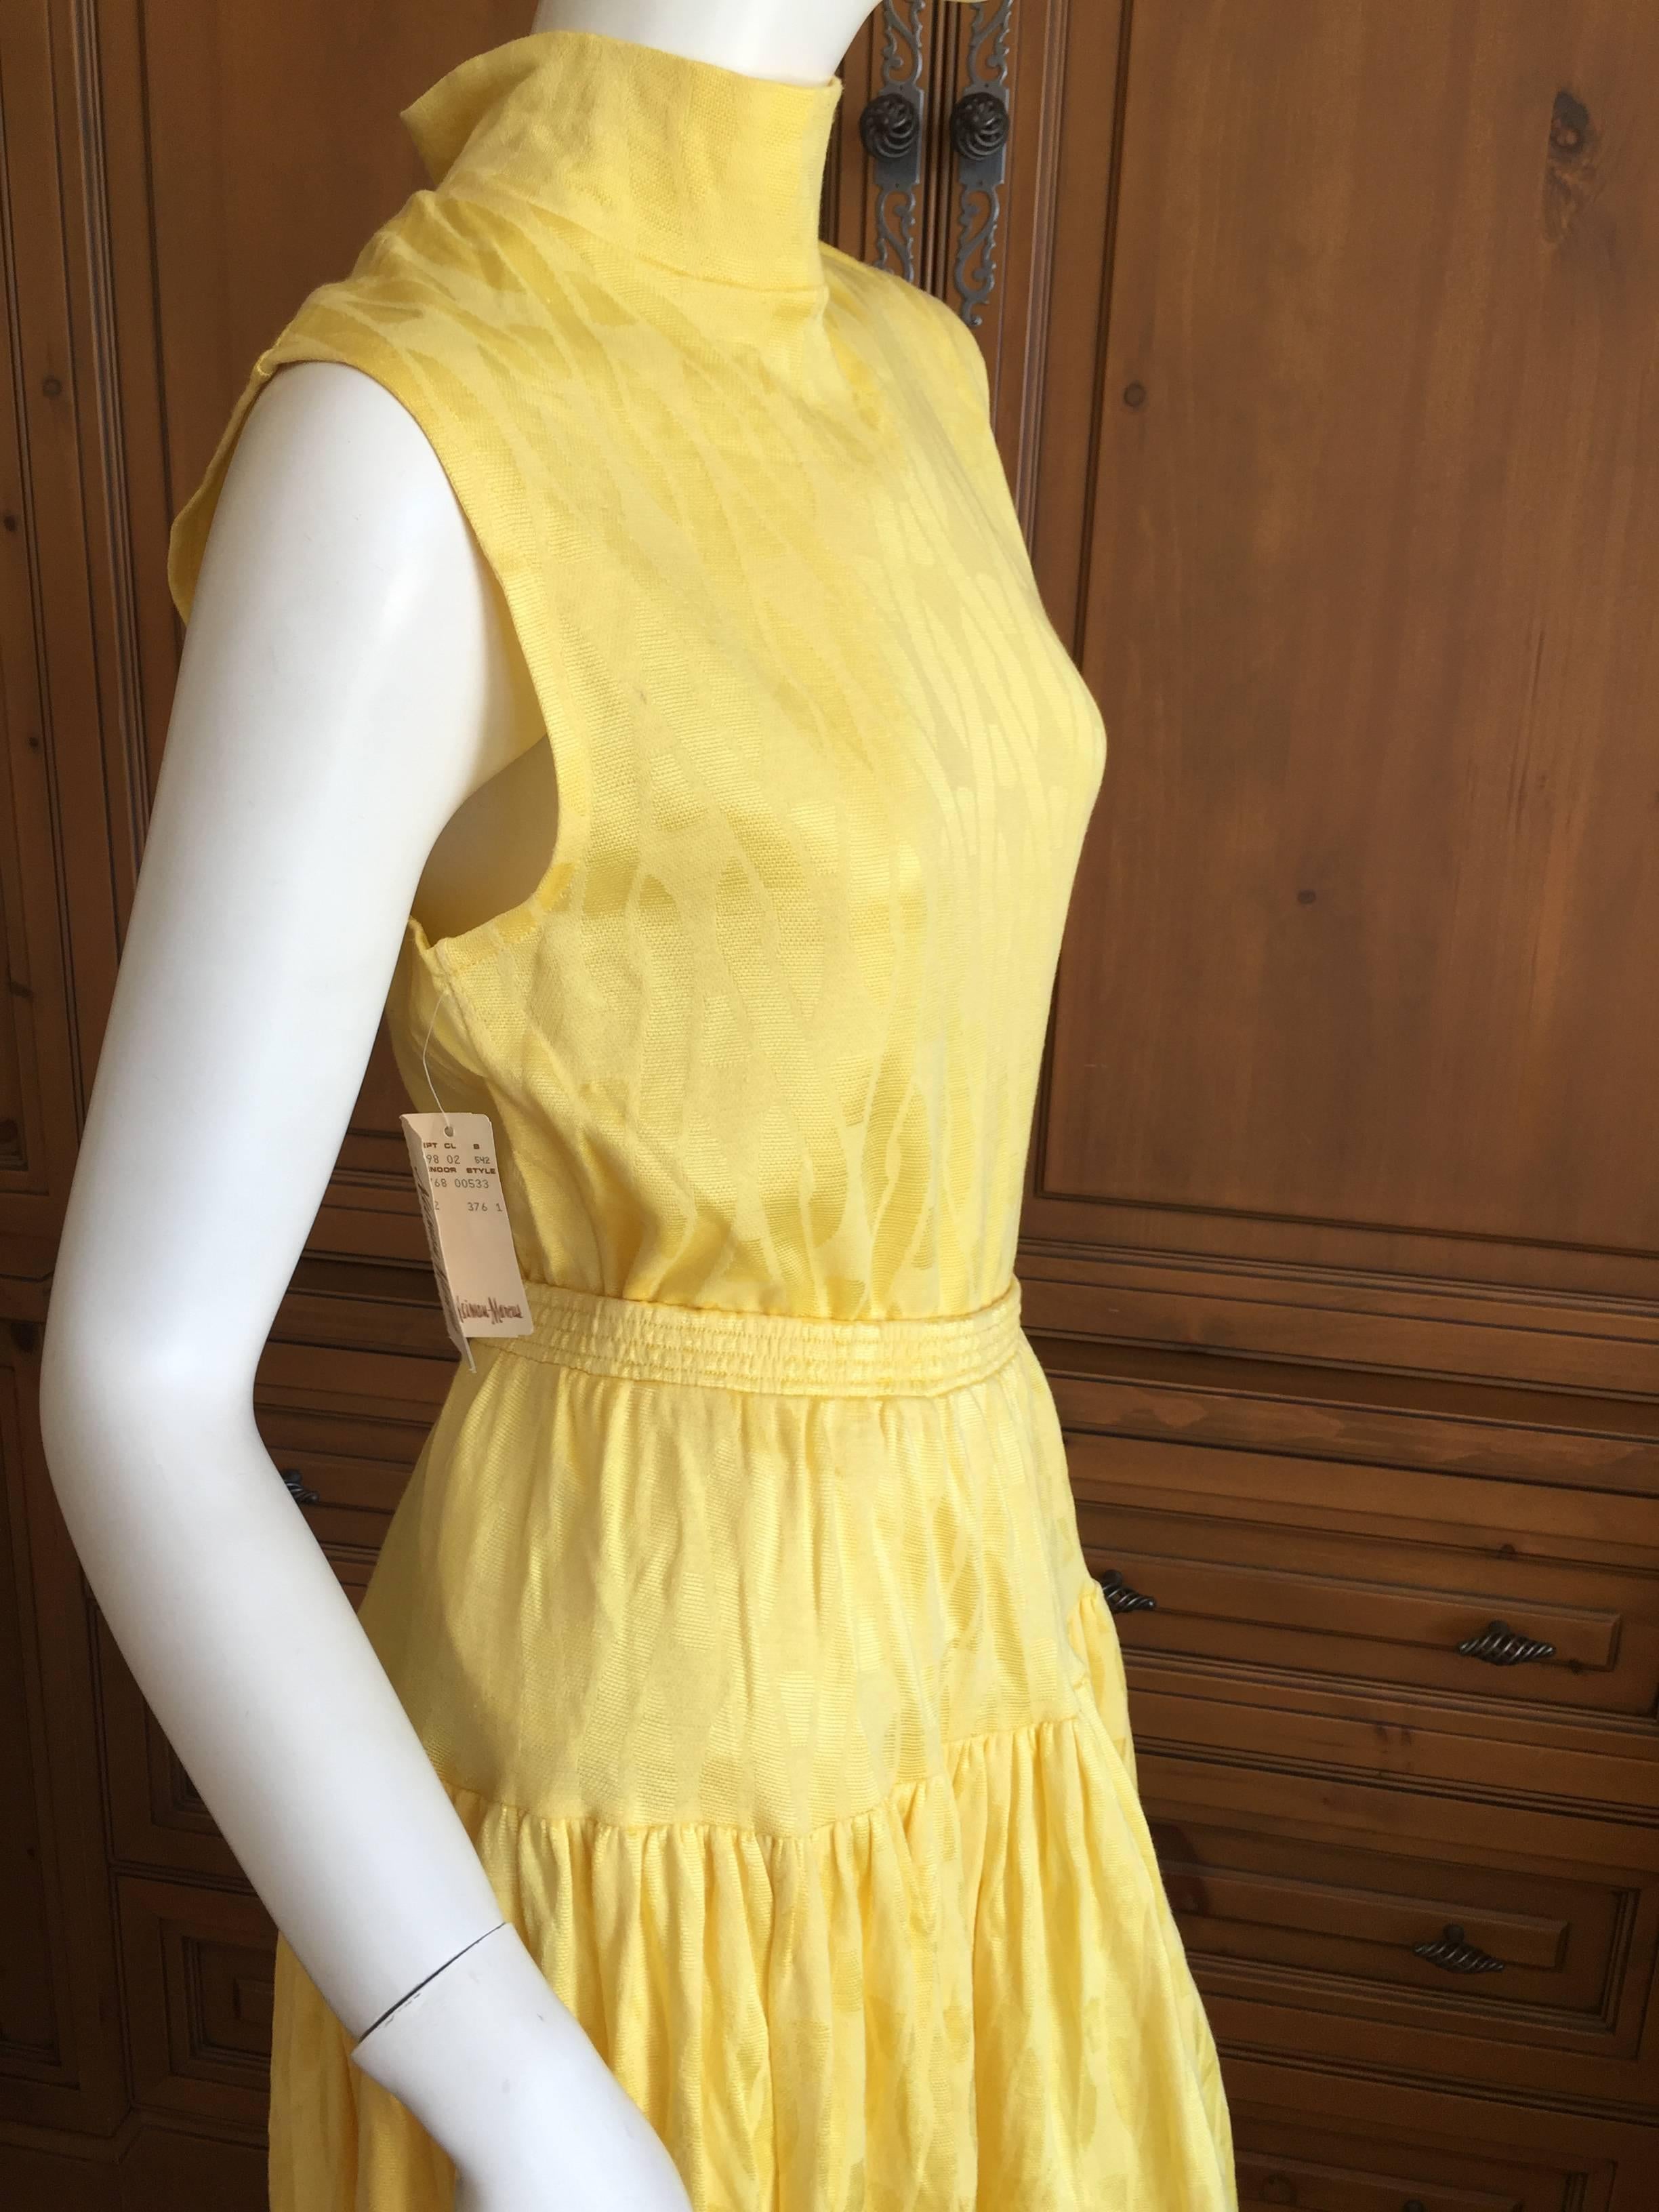 Wonderful full skirt and matching sleeveless top from Todd Oldham .
WIth Neiman Marcus tags still attached to both pieces, , this is unworn.
Yellow with a chain motif 60% cotton 40% rayon , Made in the USASkirt marked large top marked medium
Bust